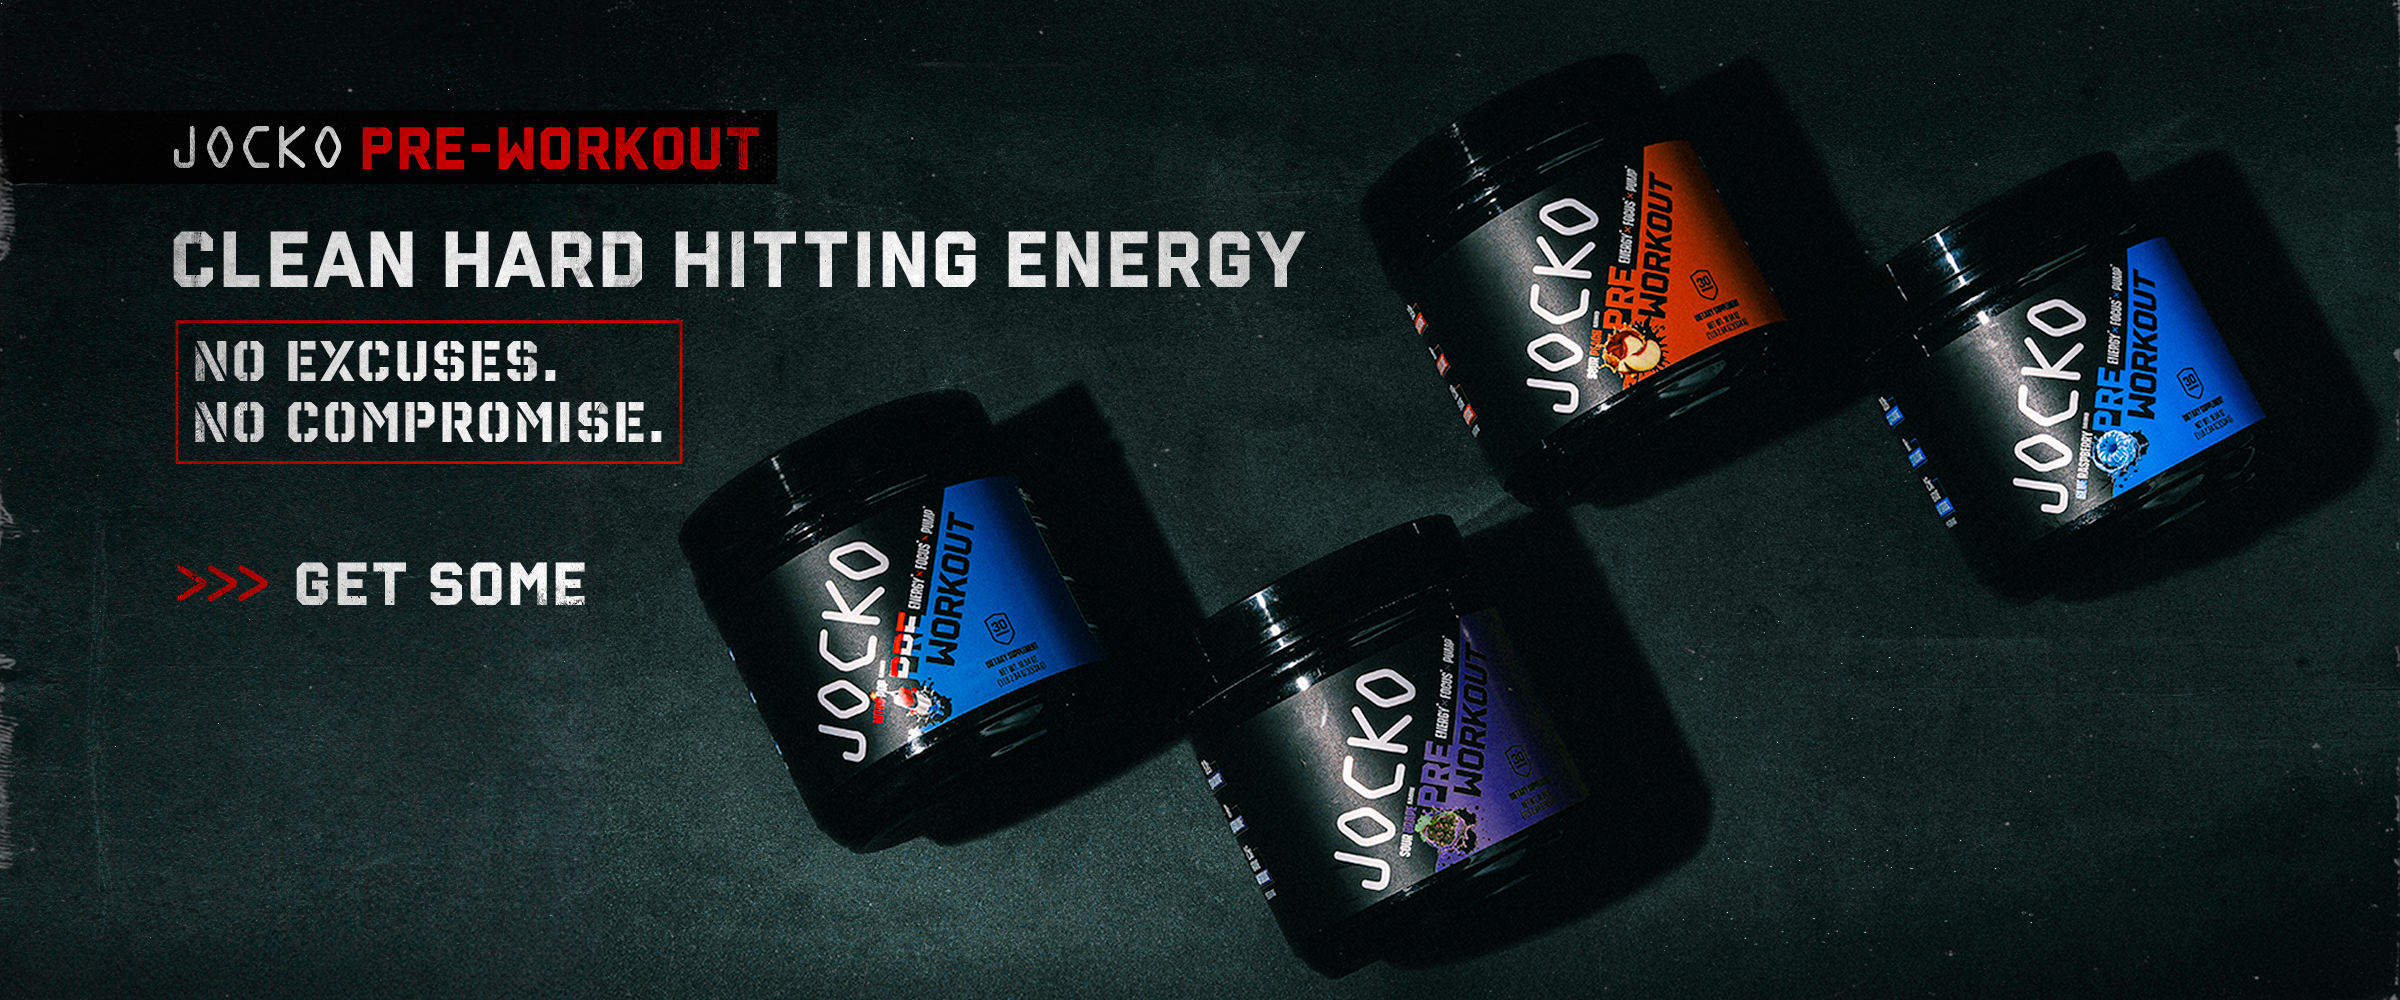 jocko Pre workout clean, hard hitting energy. No Excuses. No compromise. Get Some. 